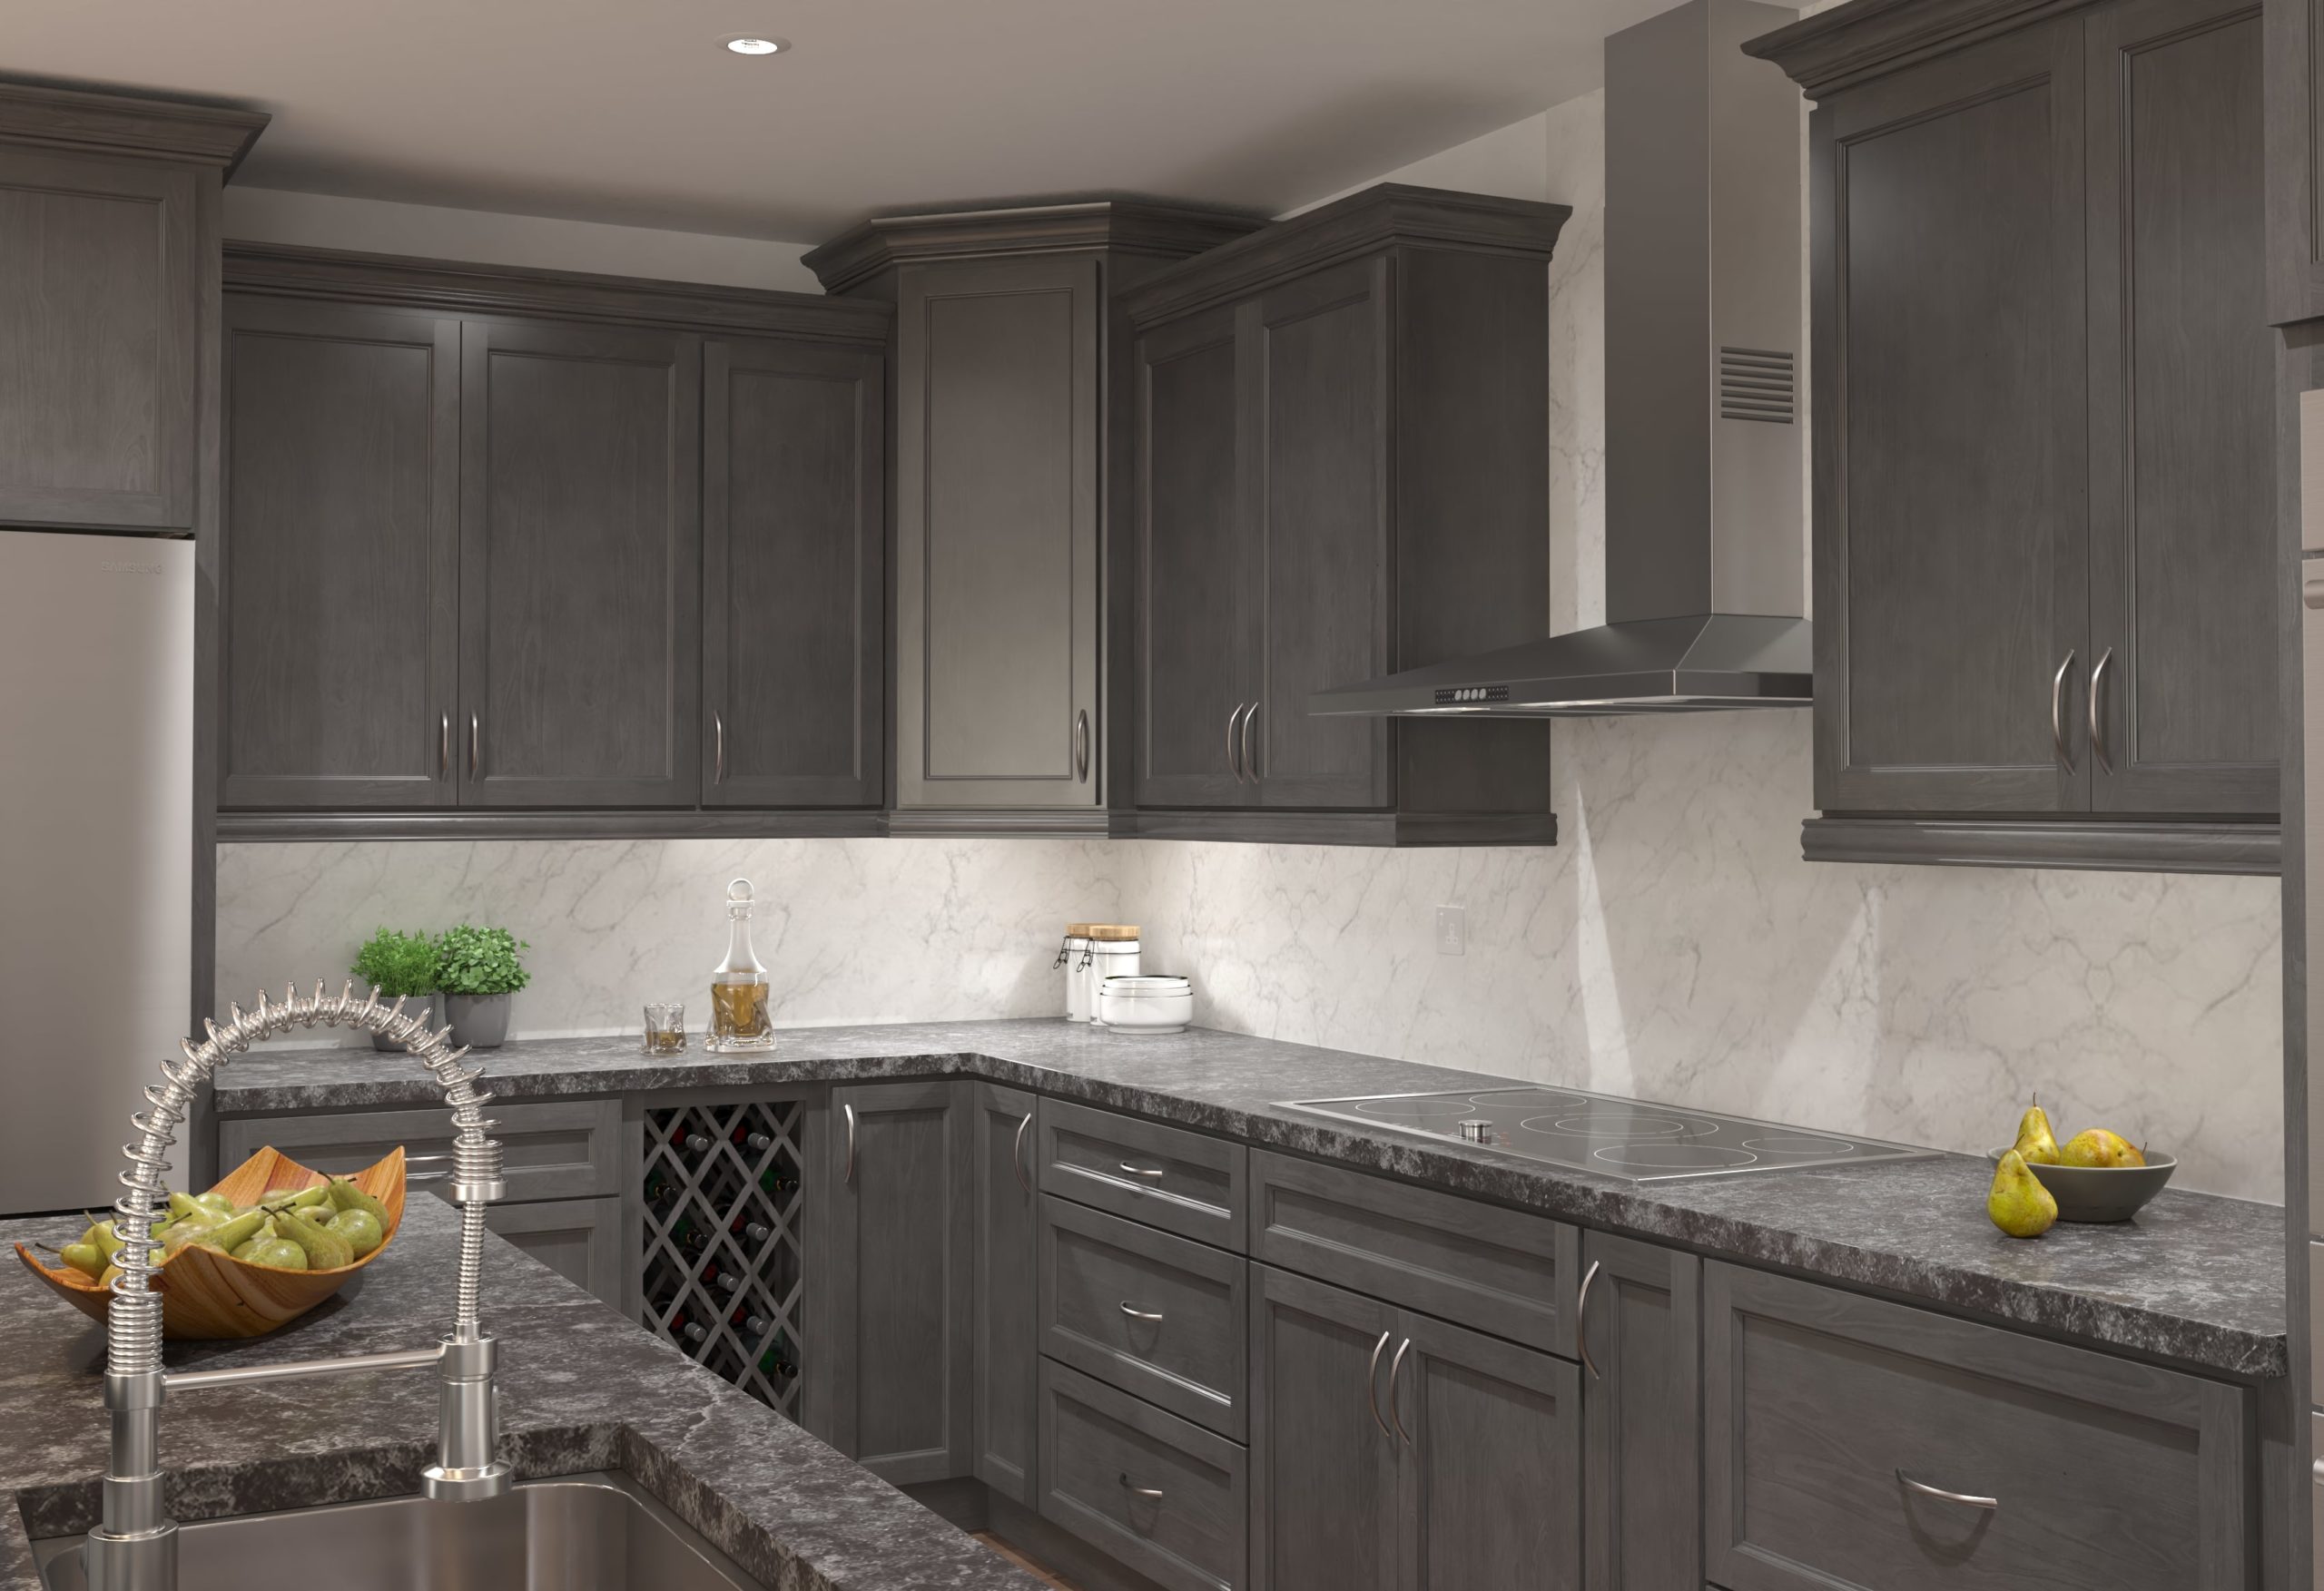 https://www.choicecabinet.com/wp-content/uploads/2019/12/Select-Graphite-Kitchen-A5-min-scaled.jpg